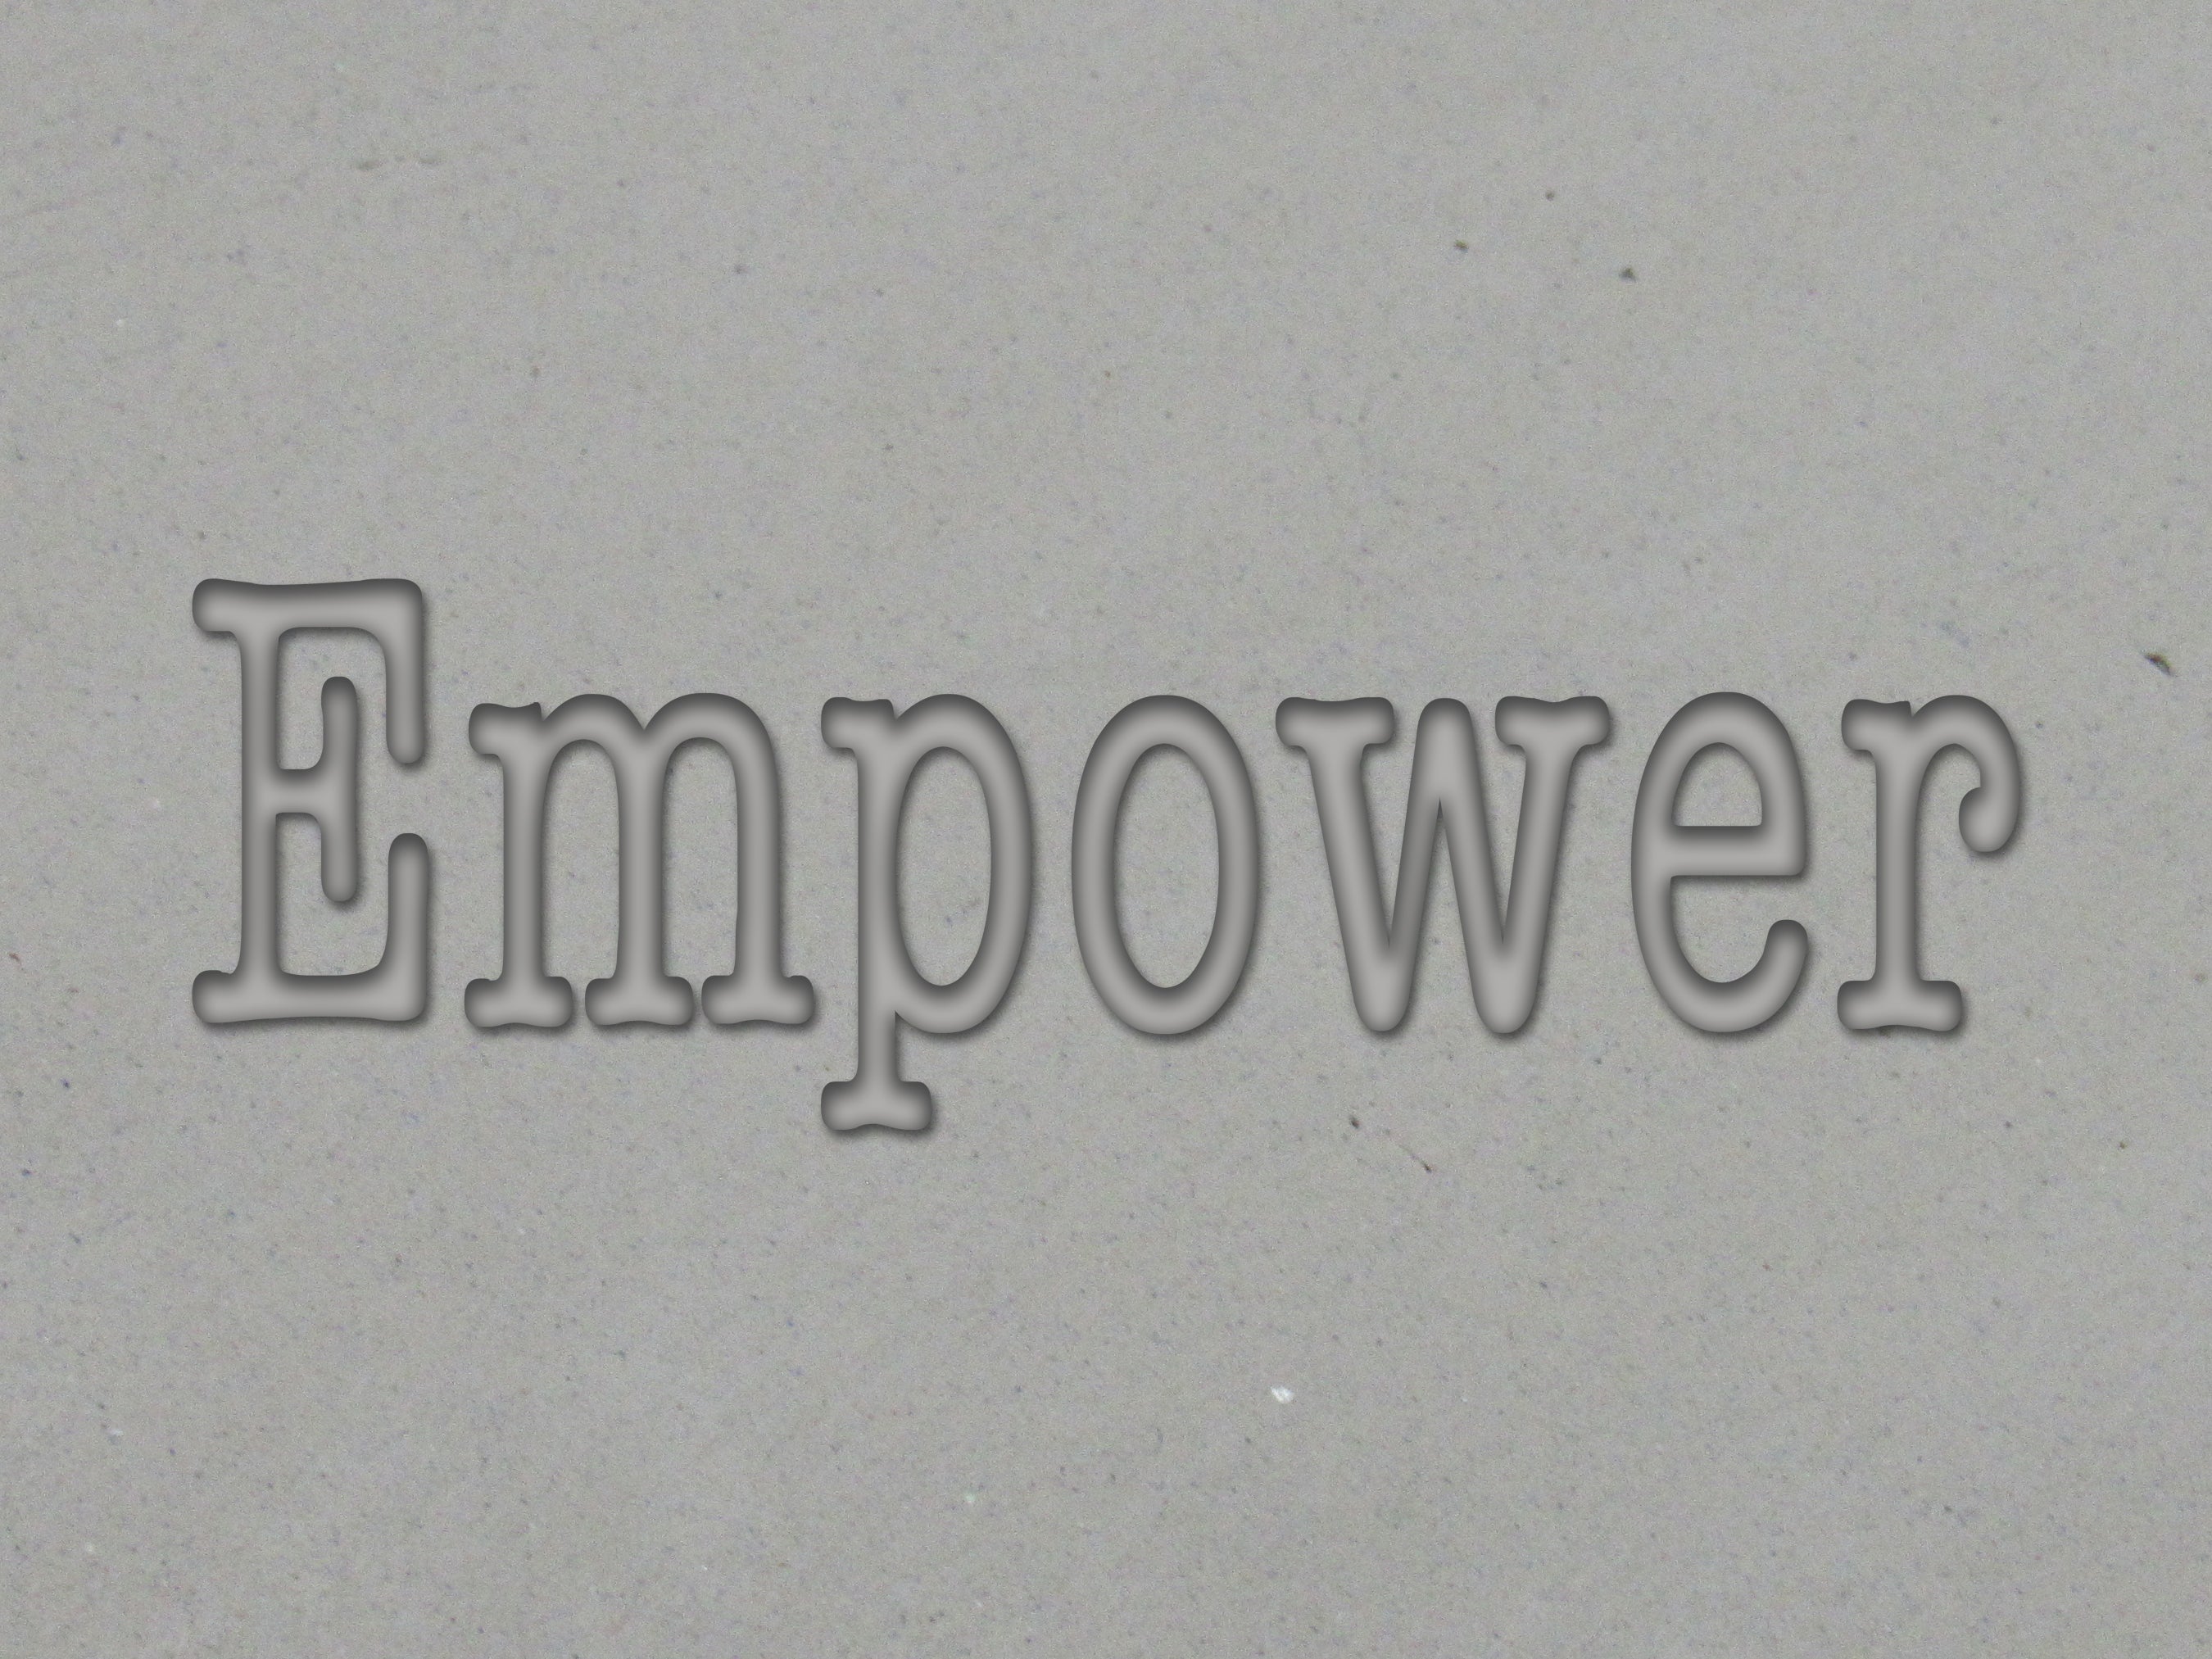 Inspirational "Empower" pottery stamp, clay stamp for slab built pottery mugs